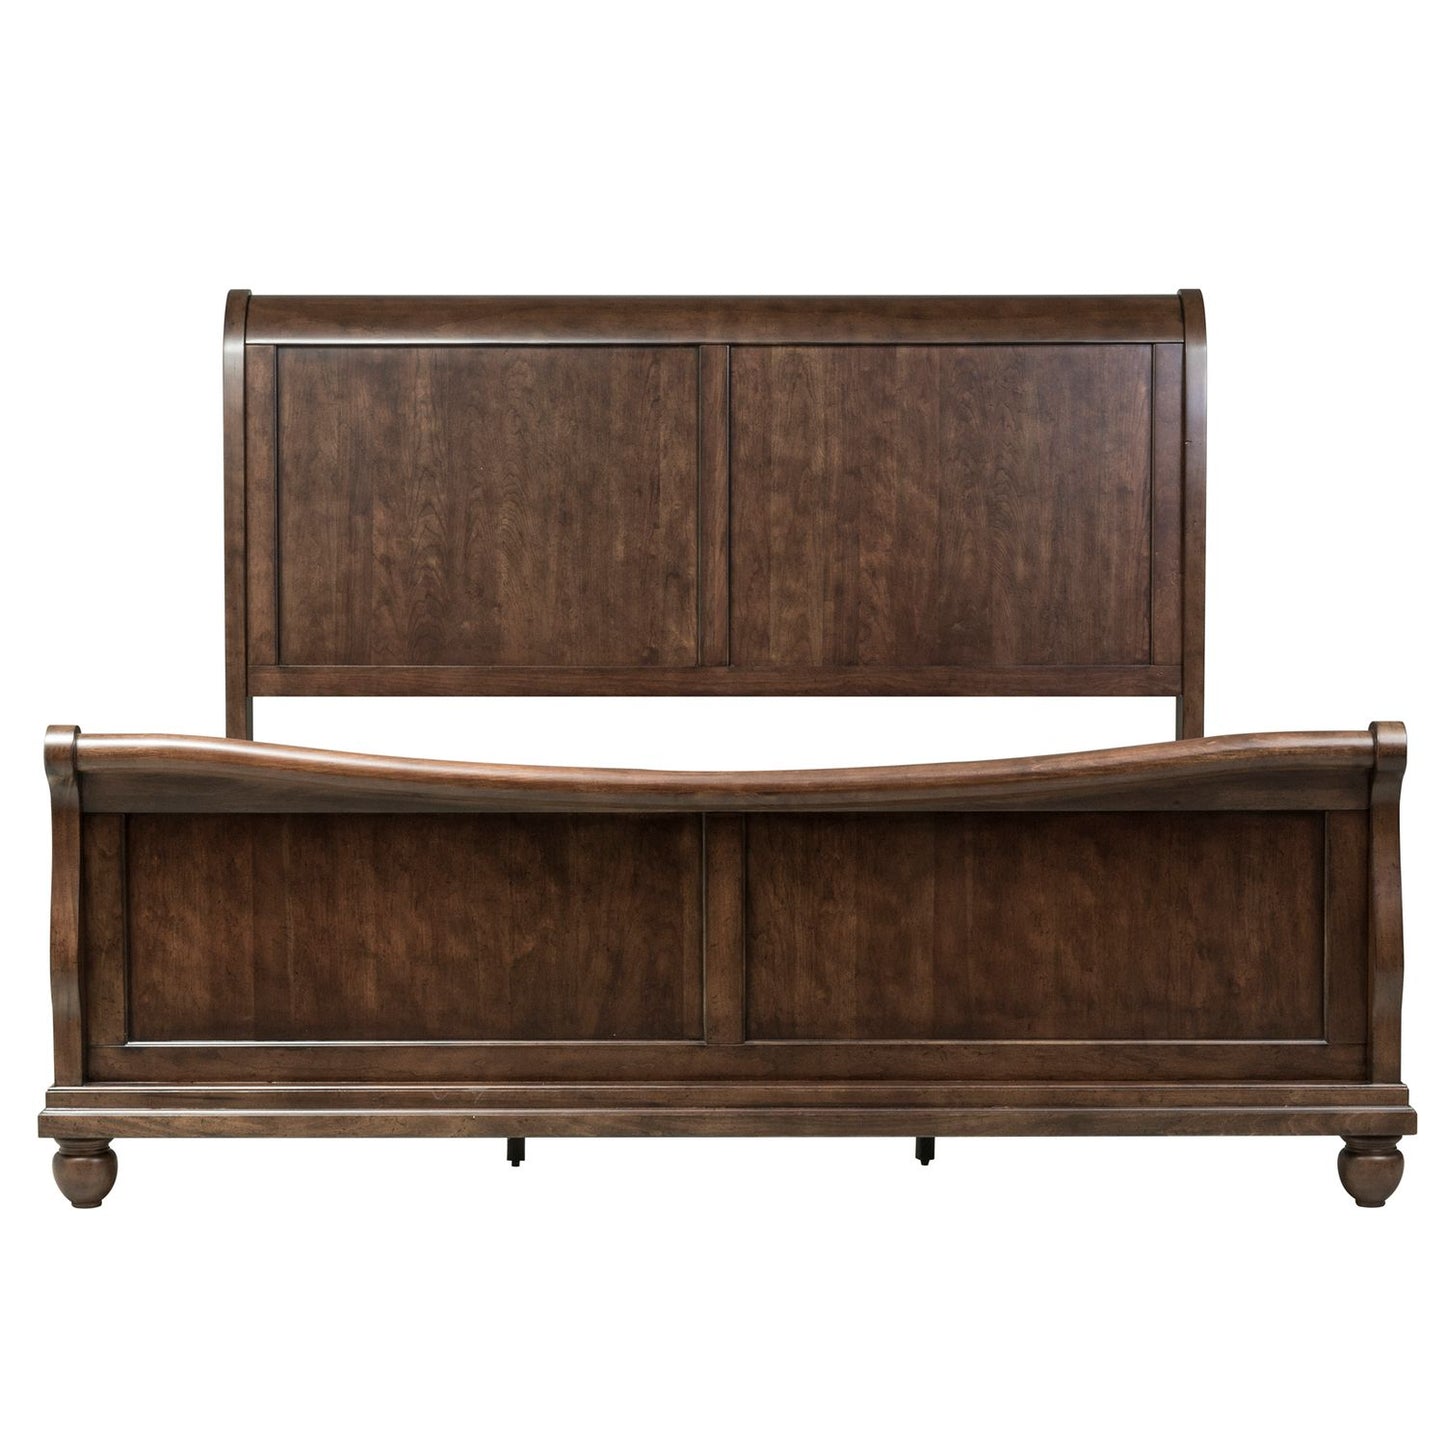 Rustic Traditions - King California Sleigh Bed, Dresser & Mirror, Chest, Night Stand